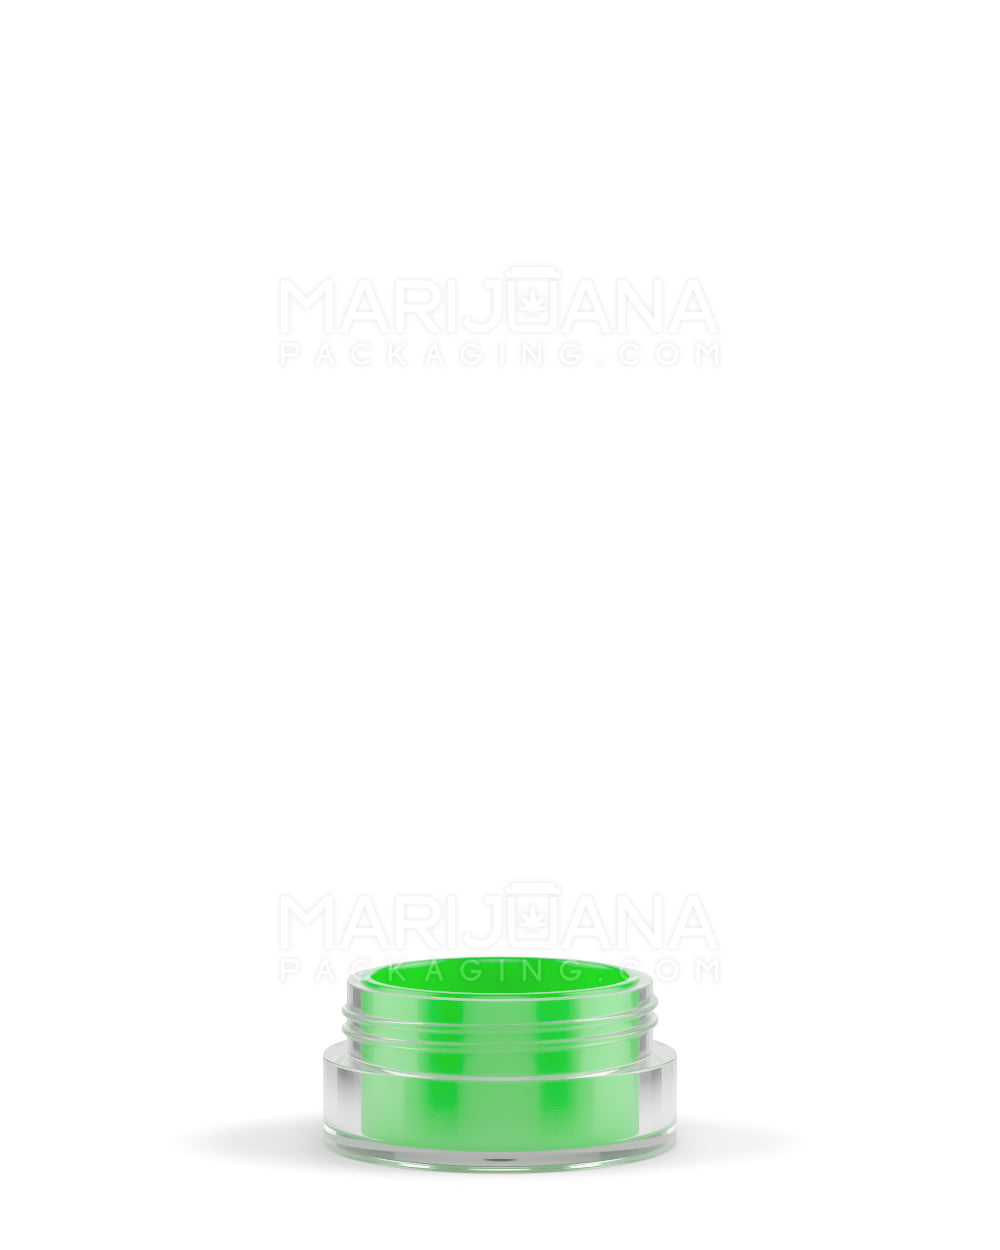 Clear Concentrate Containers w/ Screw Top Cap & Green Silicone Insert | 5mL - Plastic - 100 Count - 6